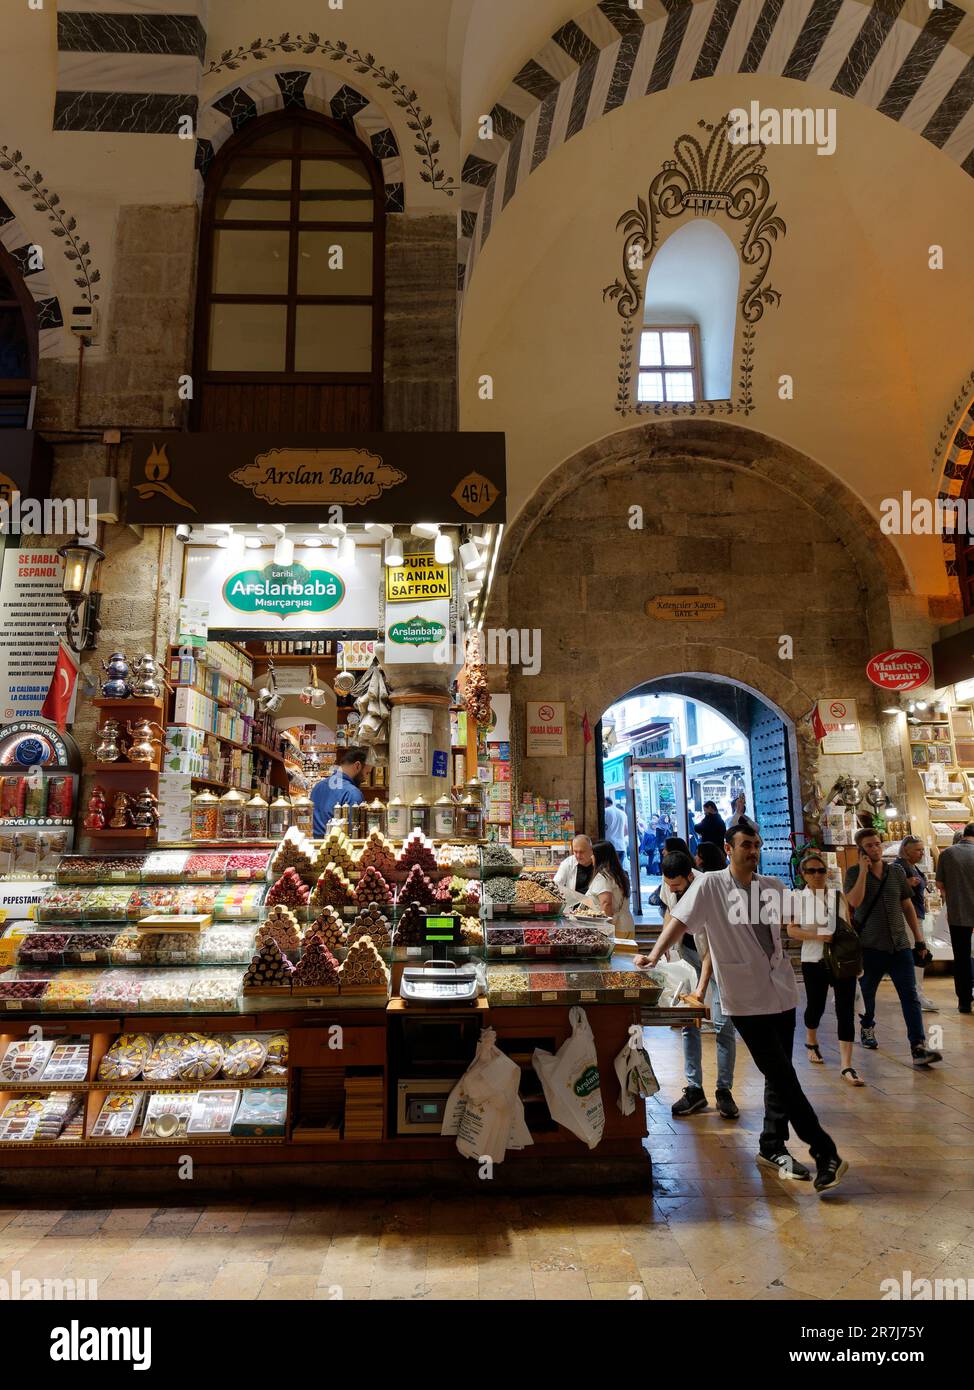 Misir Carsisi the Spice Market or Spice Bazaar in Istanbul, Turkey Stock Photo